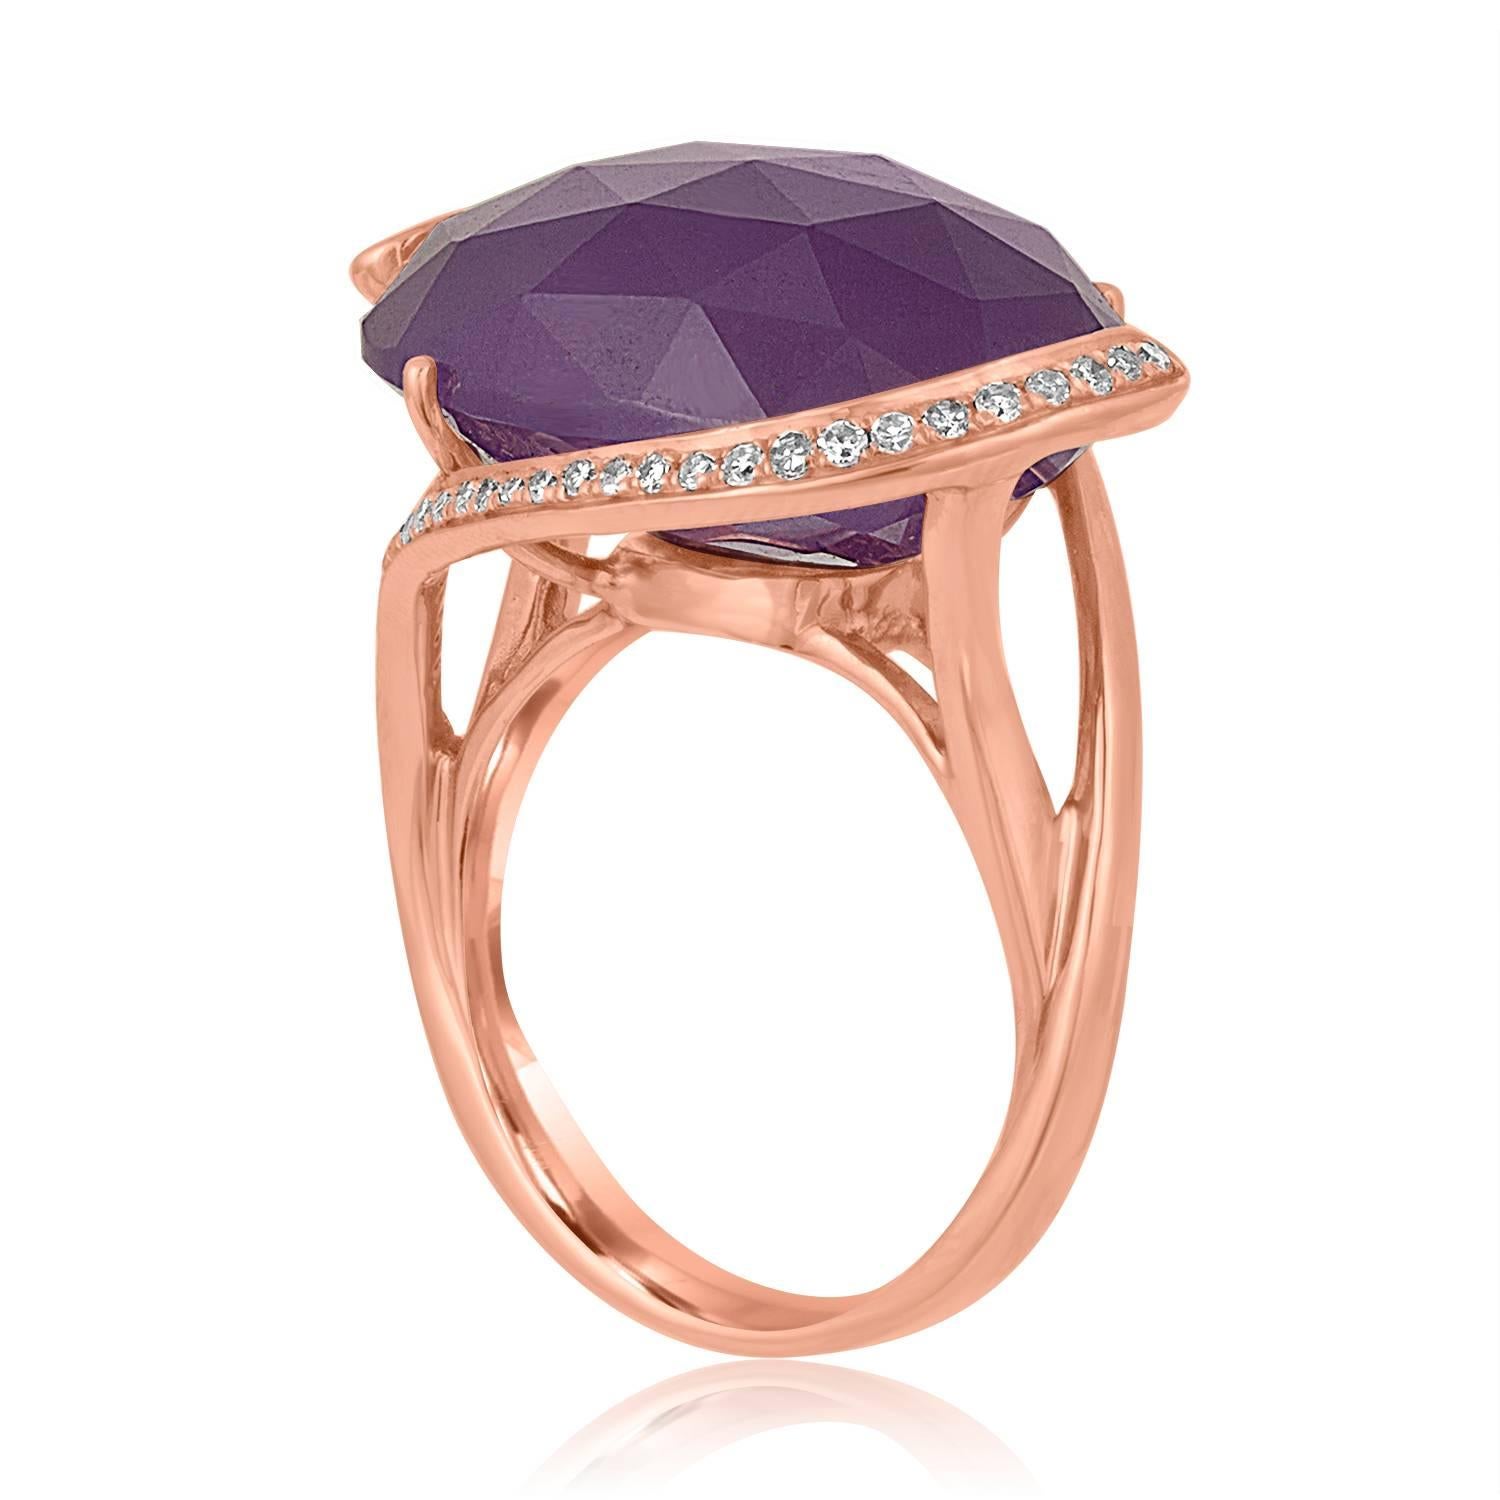 Beautiful and Fashionable Purple Colored Jade Ring
The ring is 14K Rose Gold
The Oval Purple Jade is 24.85 Carats
There are 0.16 Carats in Diamonds G/H SI
The top of the ring measures 1